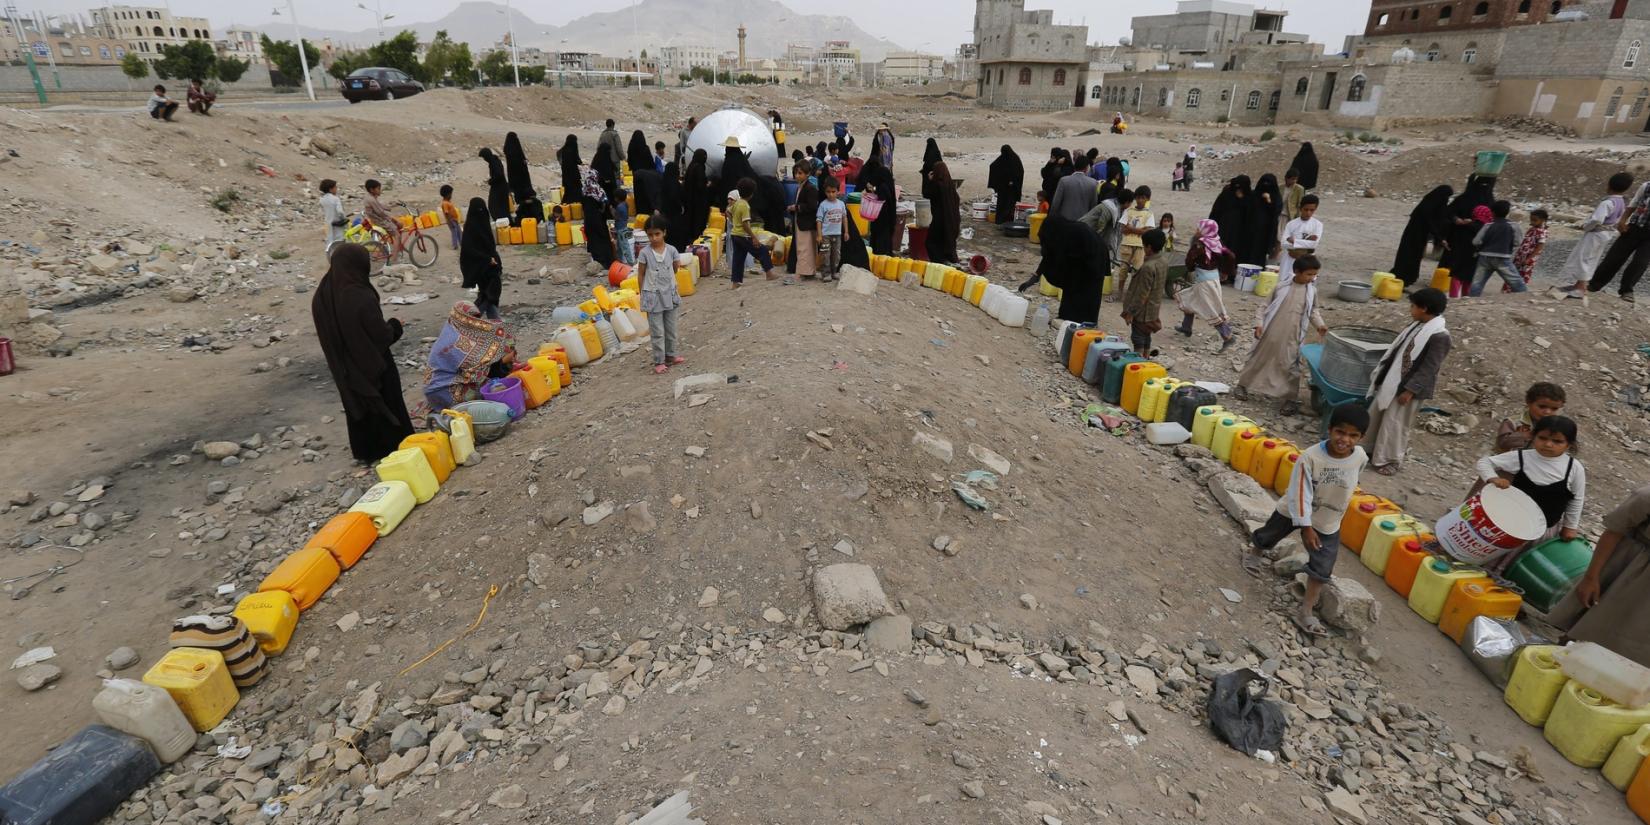 Yemeni women and children wait to fill jerry cans with water from a spring. © Keystone